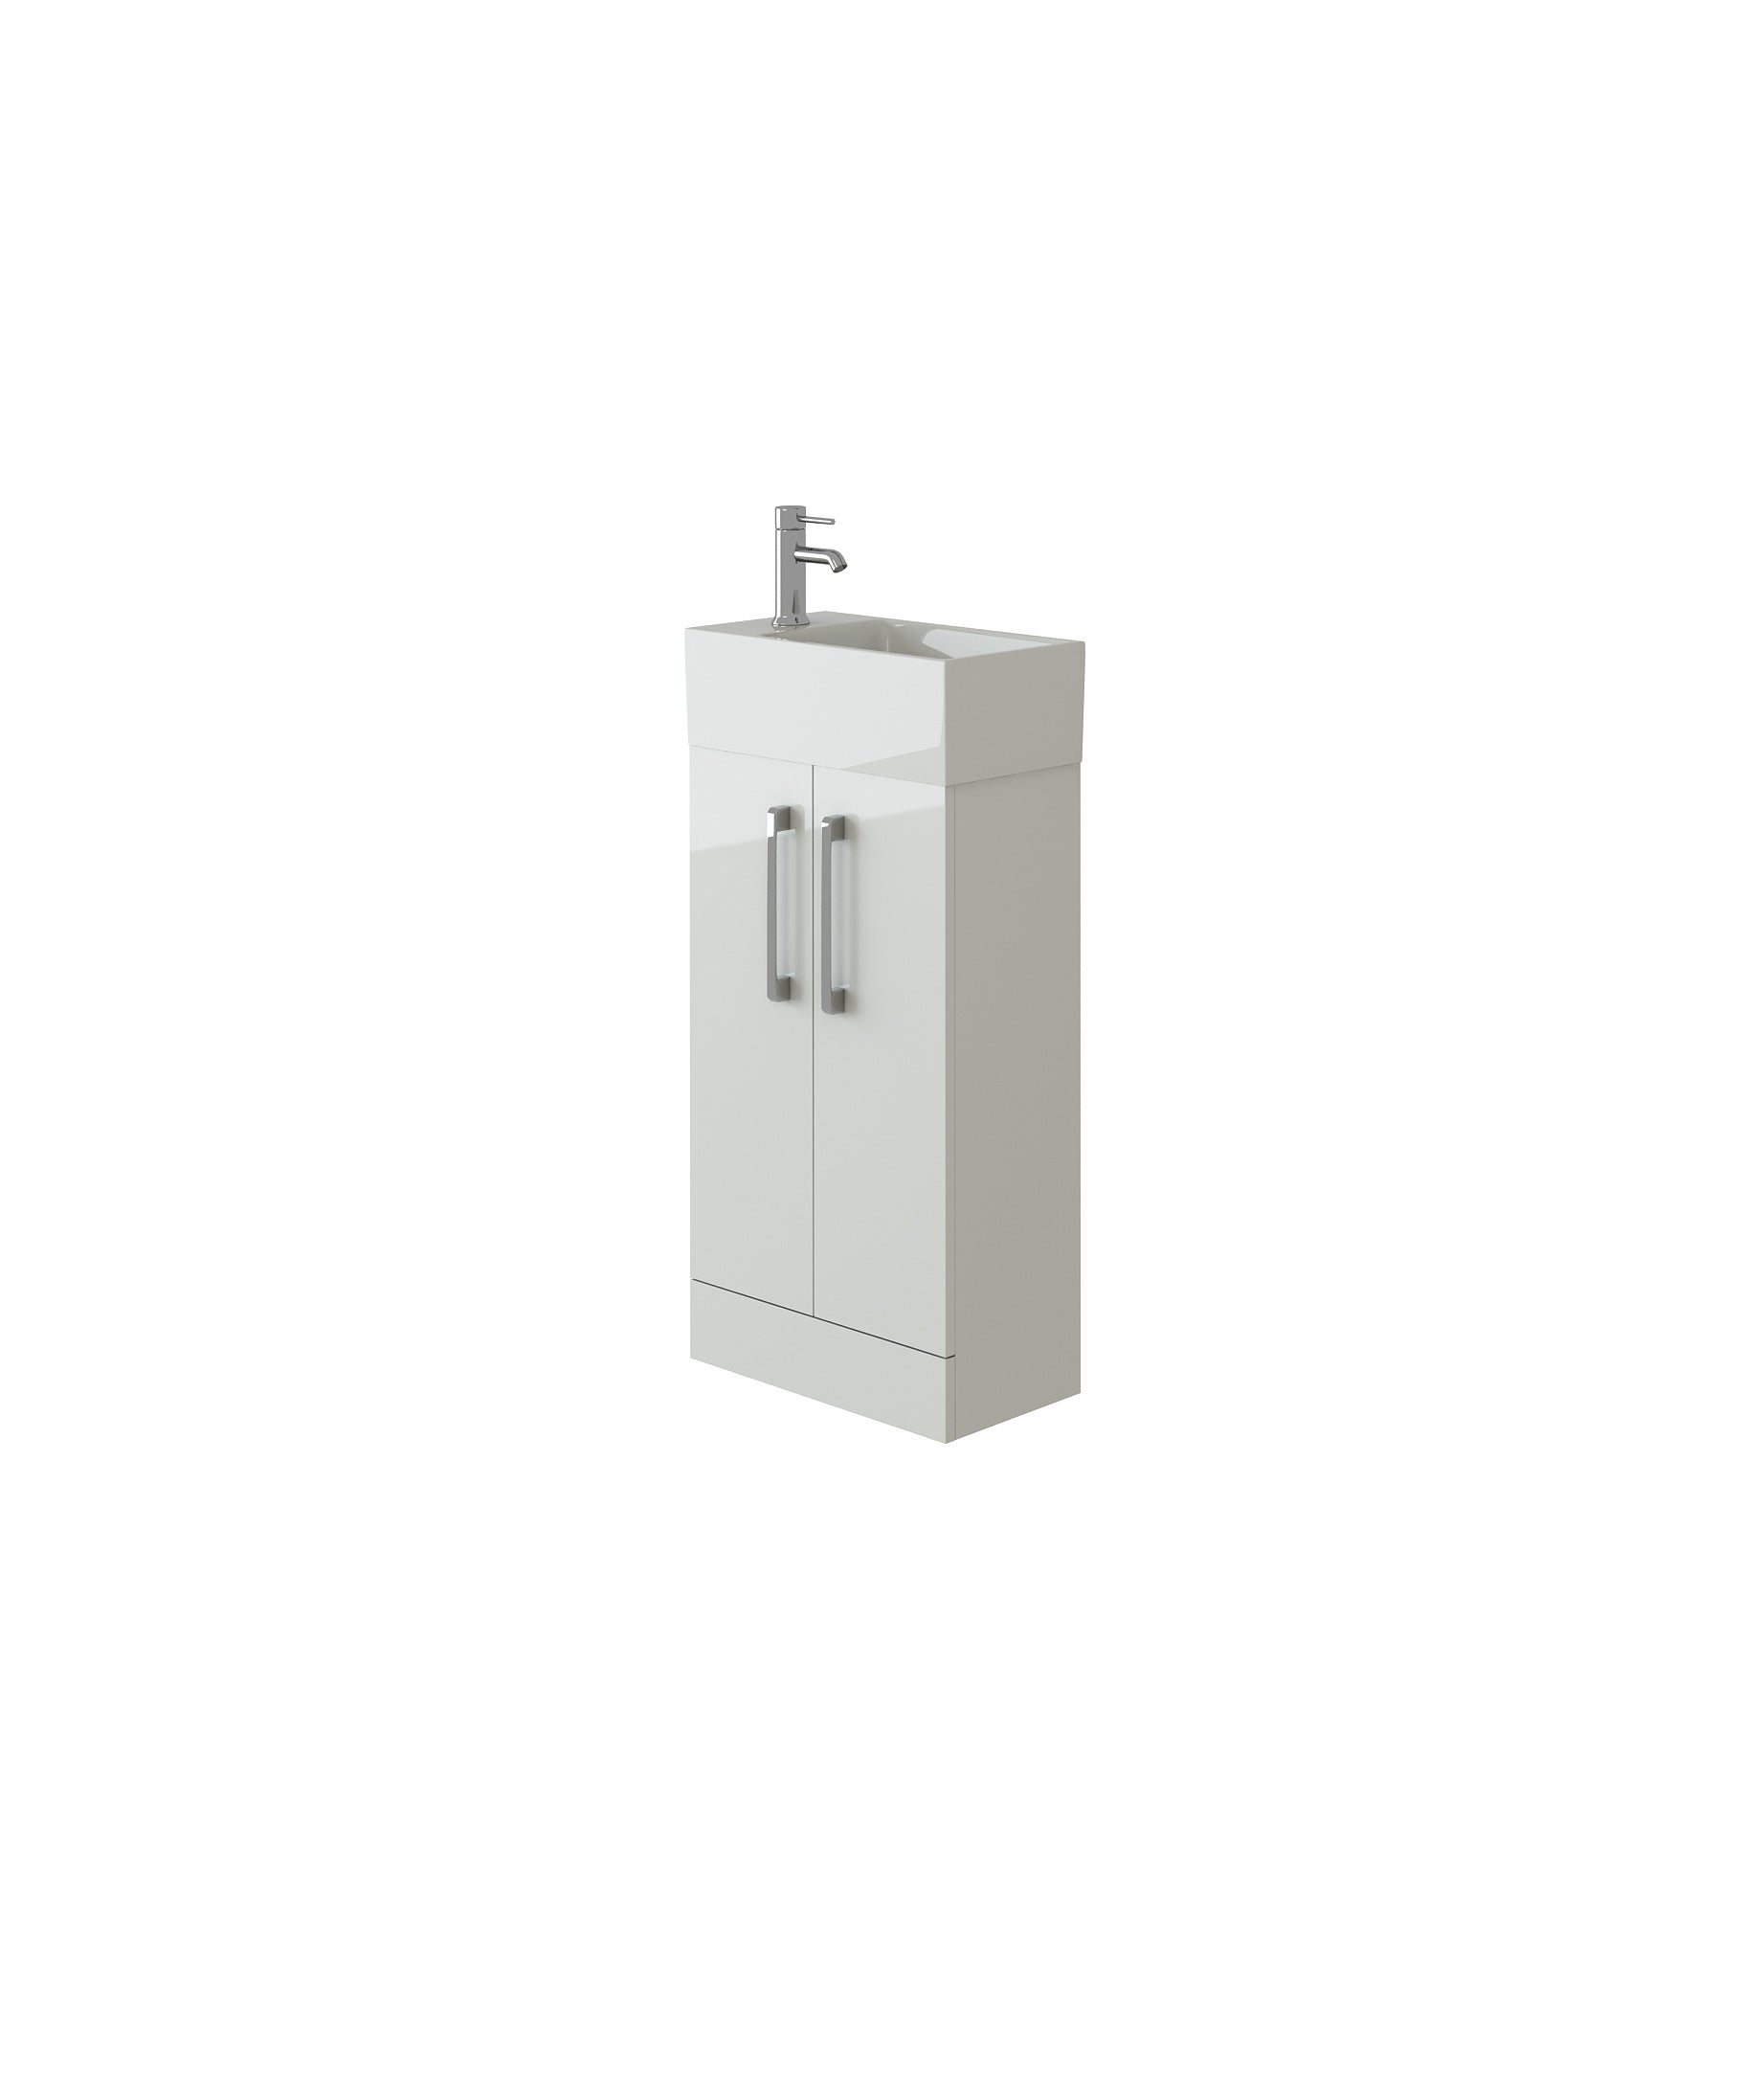 Star Cloakroom Vanity Unit With Basin - 470mm x 230mm - Gloss White